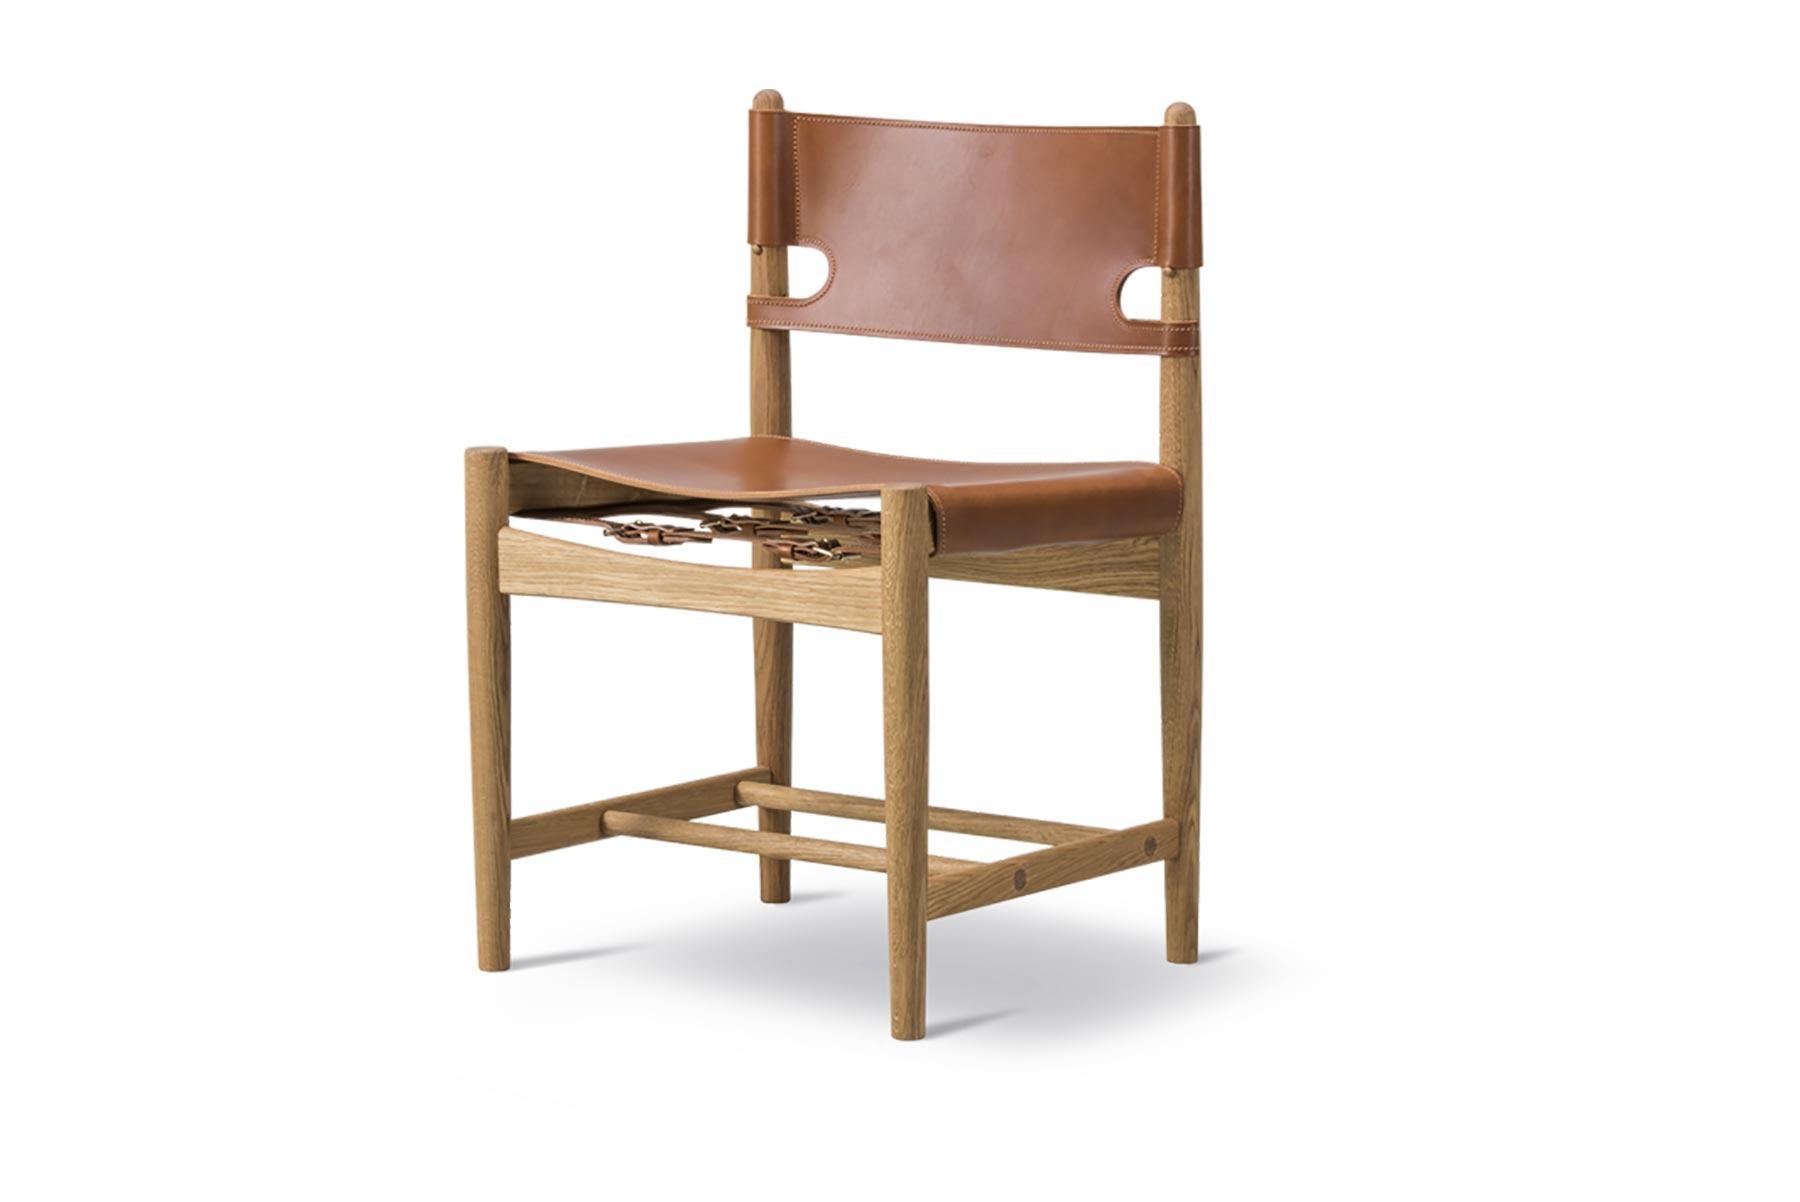 The Spanish dining chair is a testament to the application of honest materials. Crafted from the finest selection of oak and flawless saddle leather, the chair is available with or without armrests, and with multiple finishes from light to darker